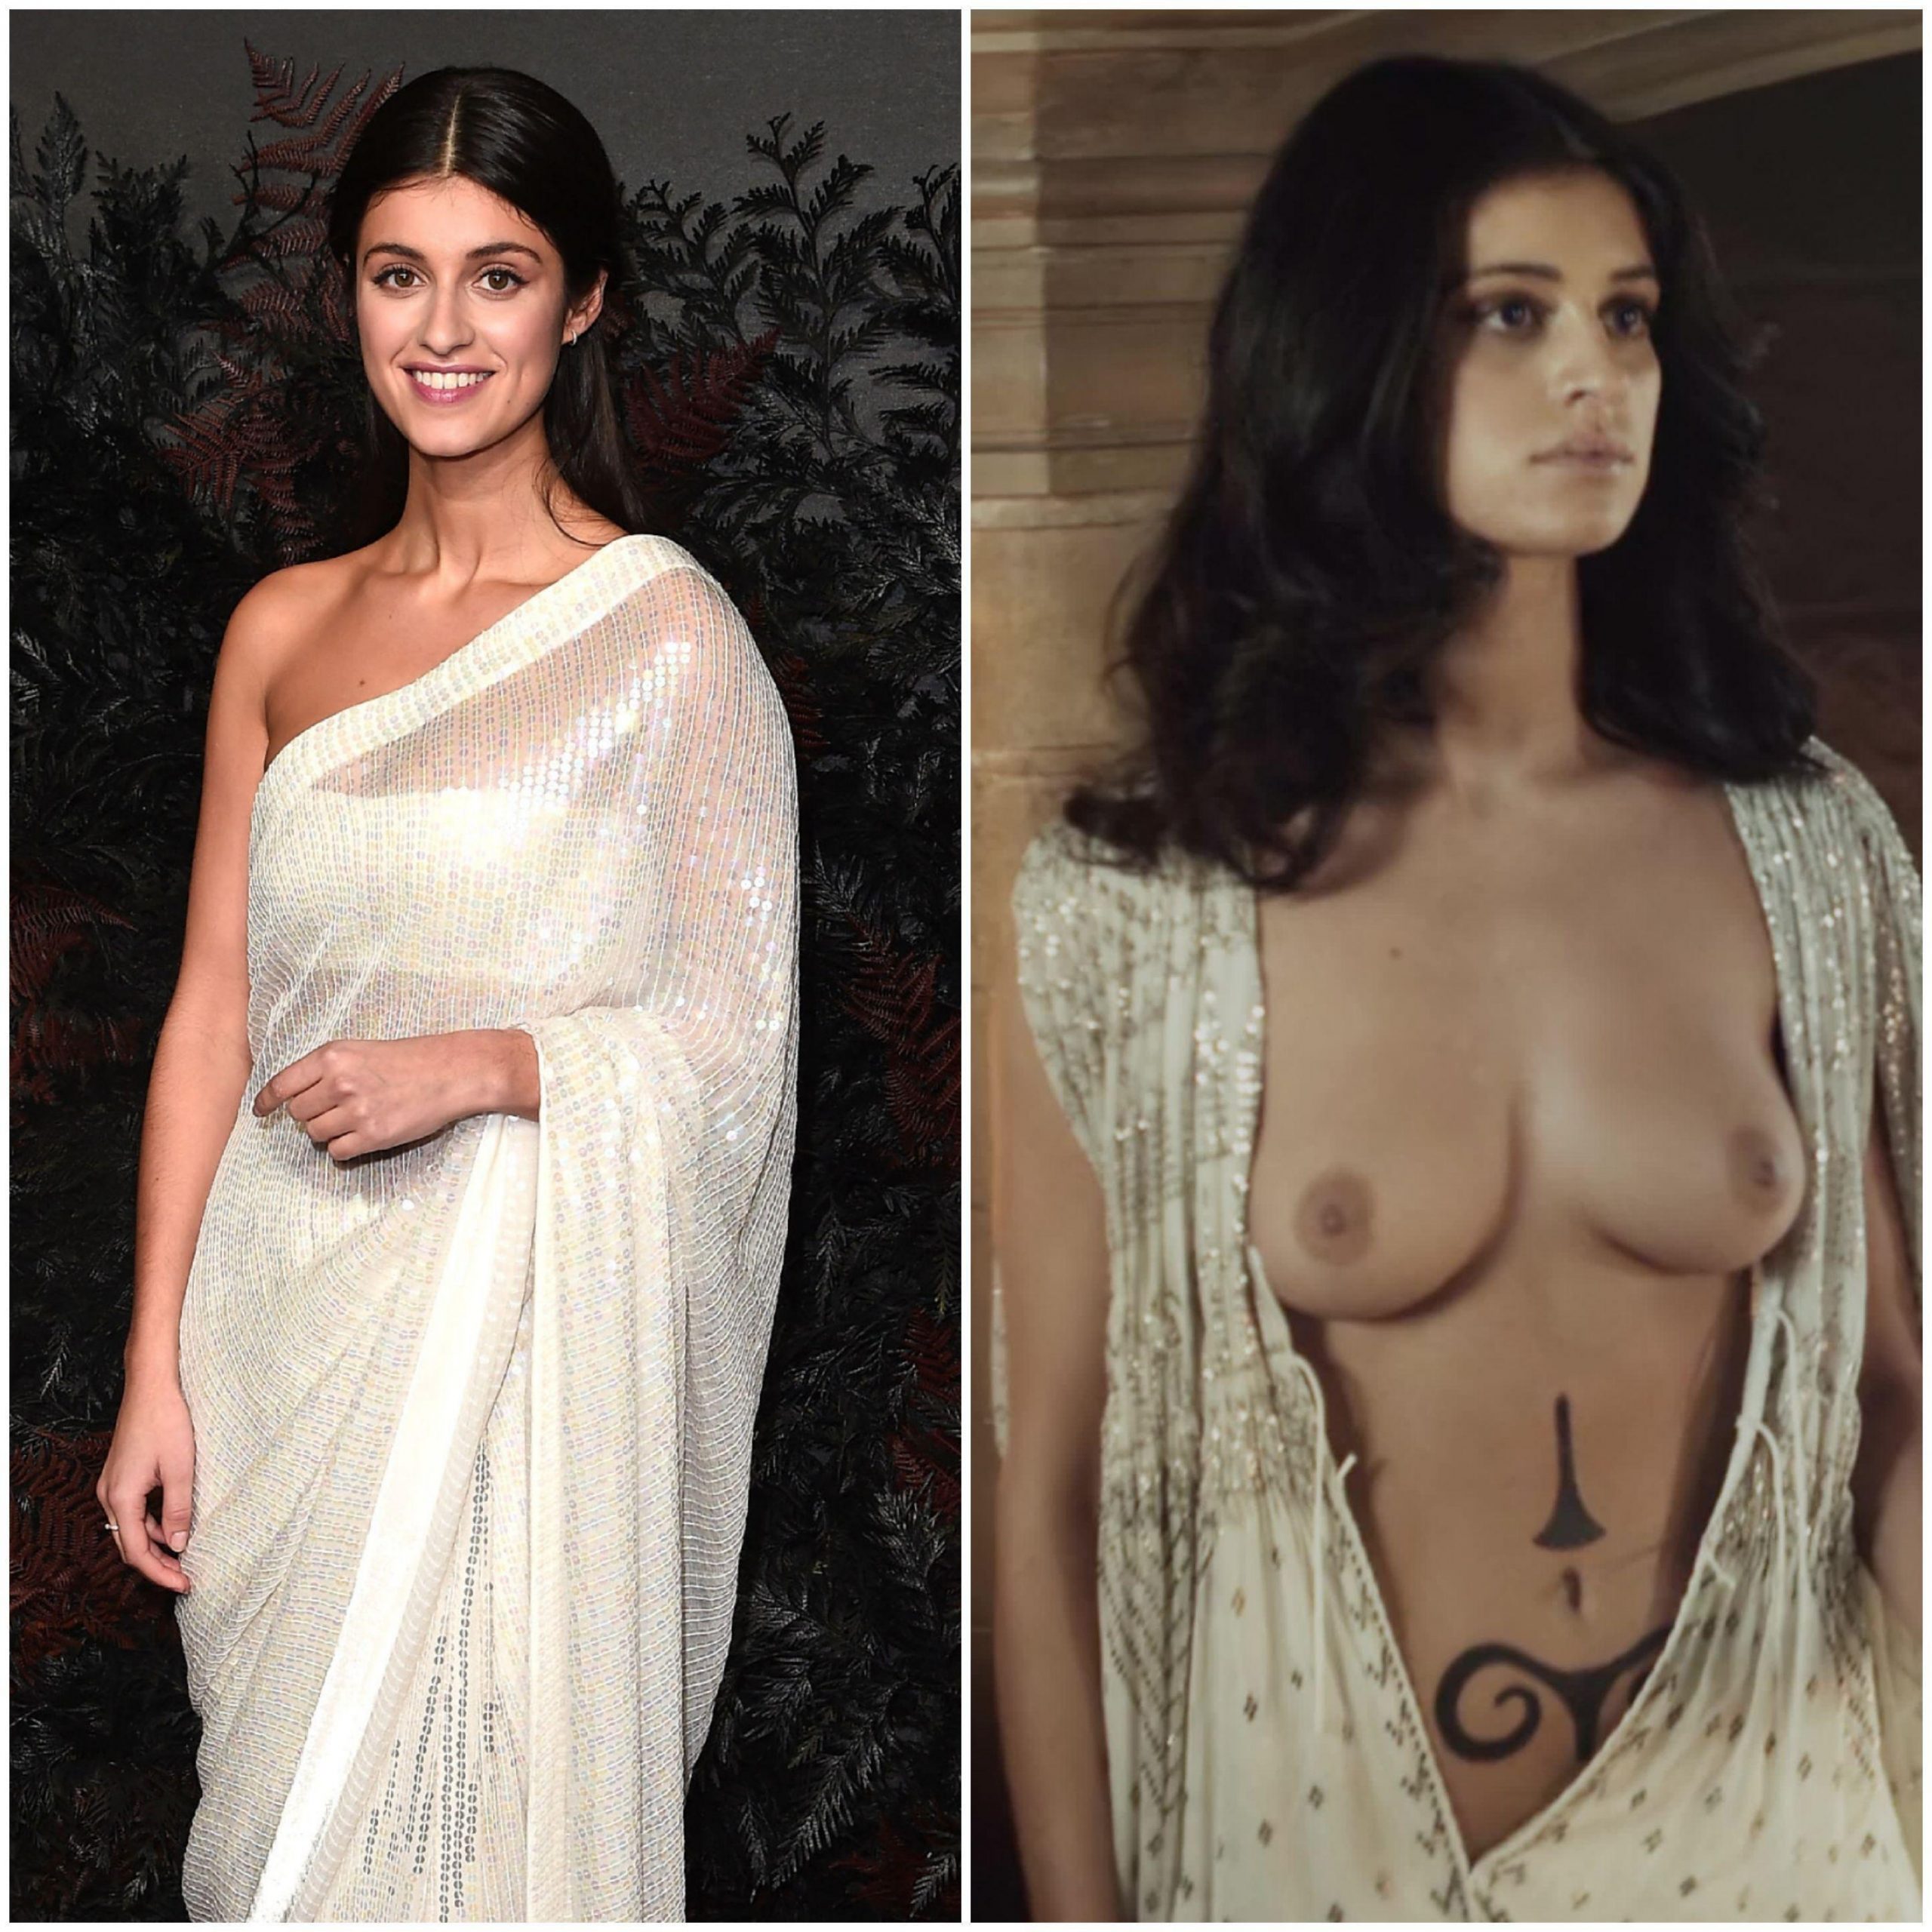 Anya Chalotra On/off - Famous Nipple.